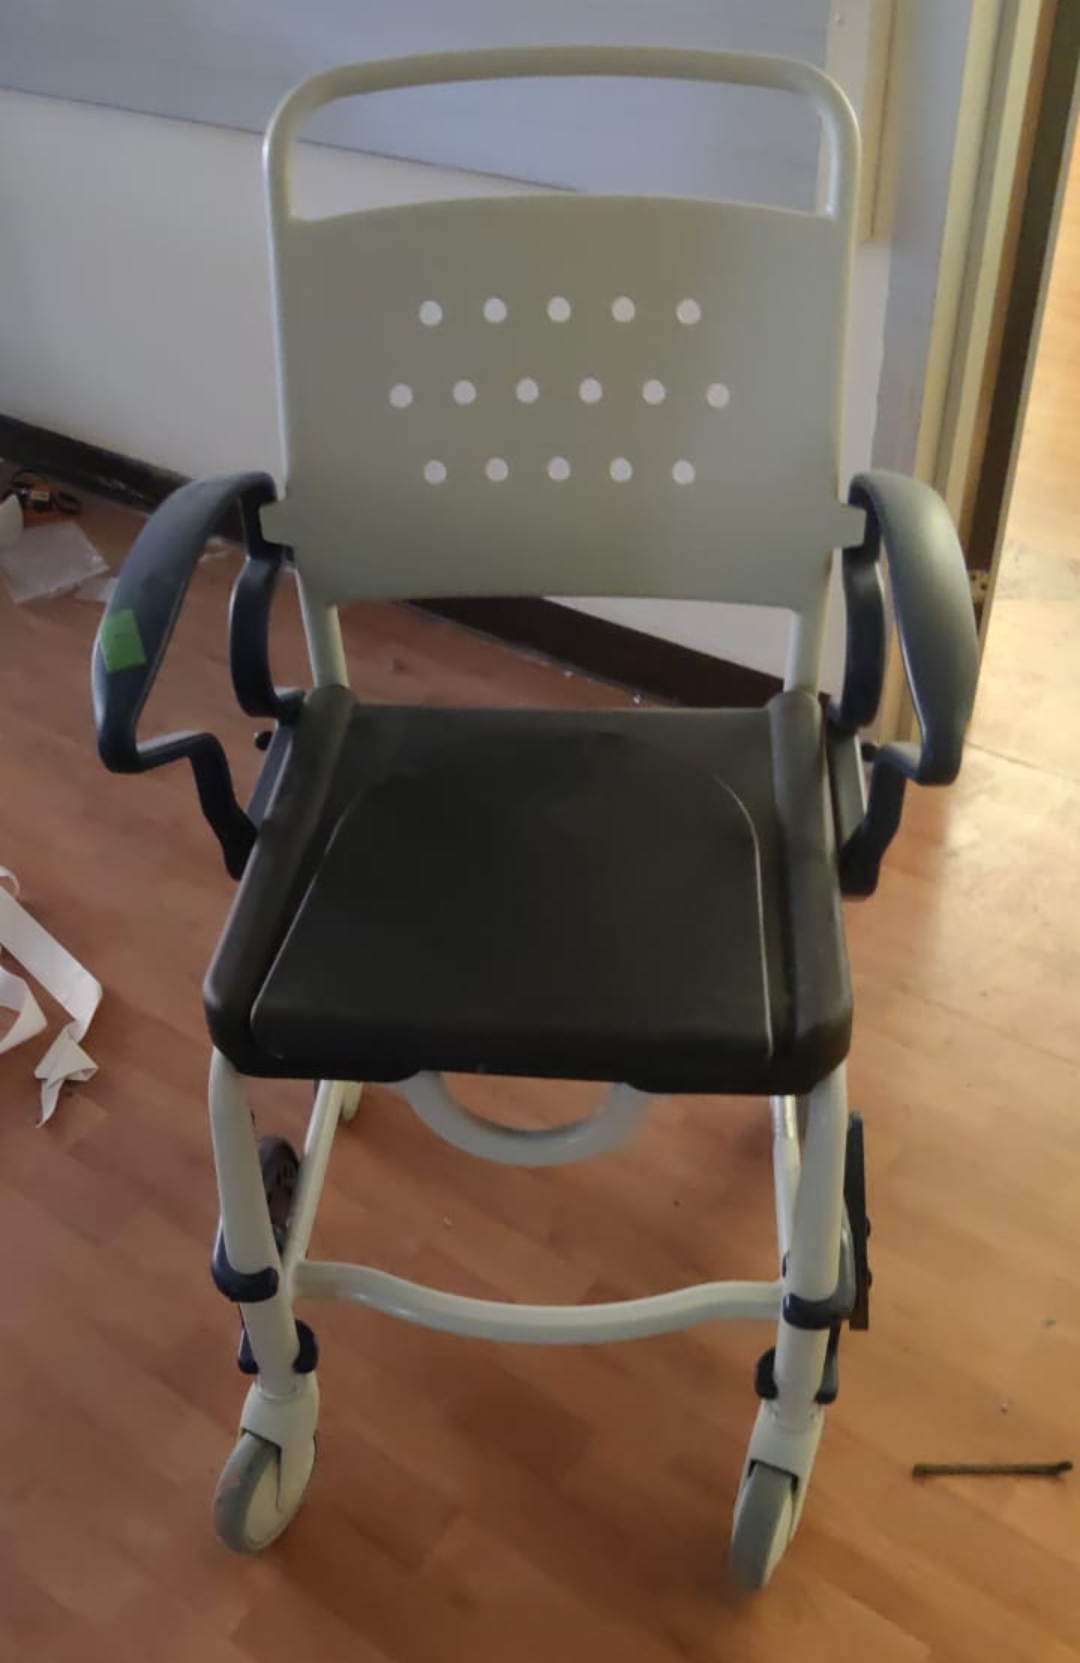 Wheel chair for patients